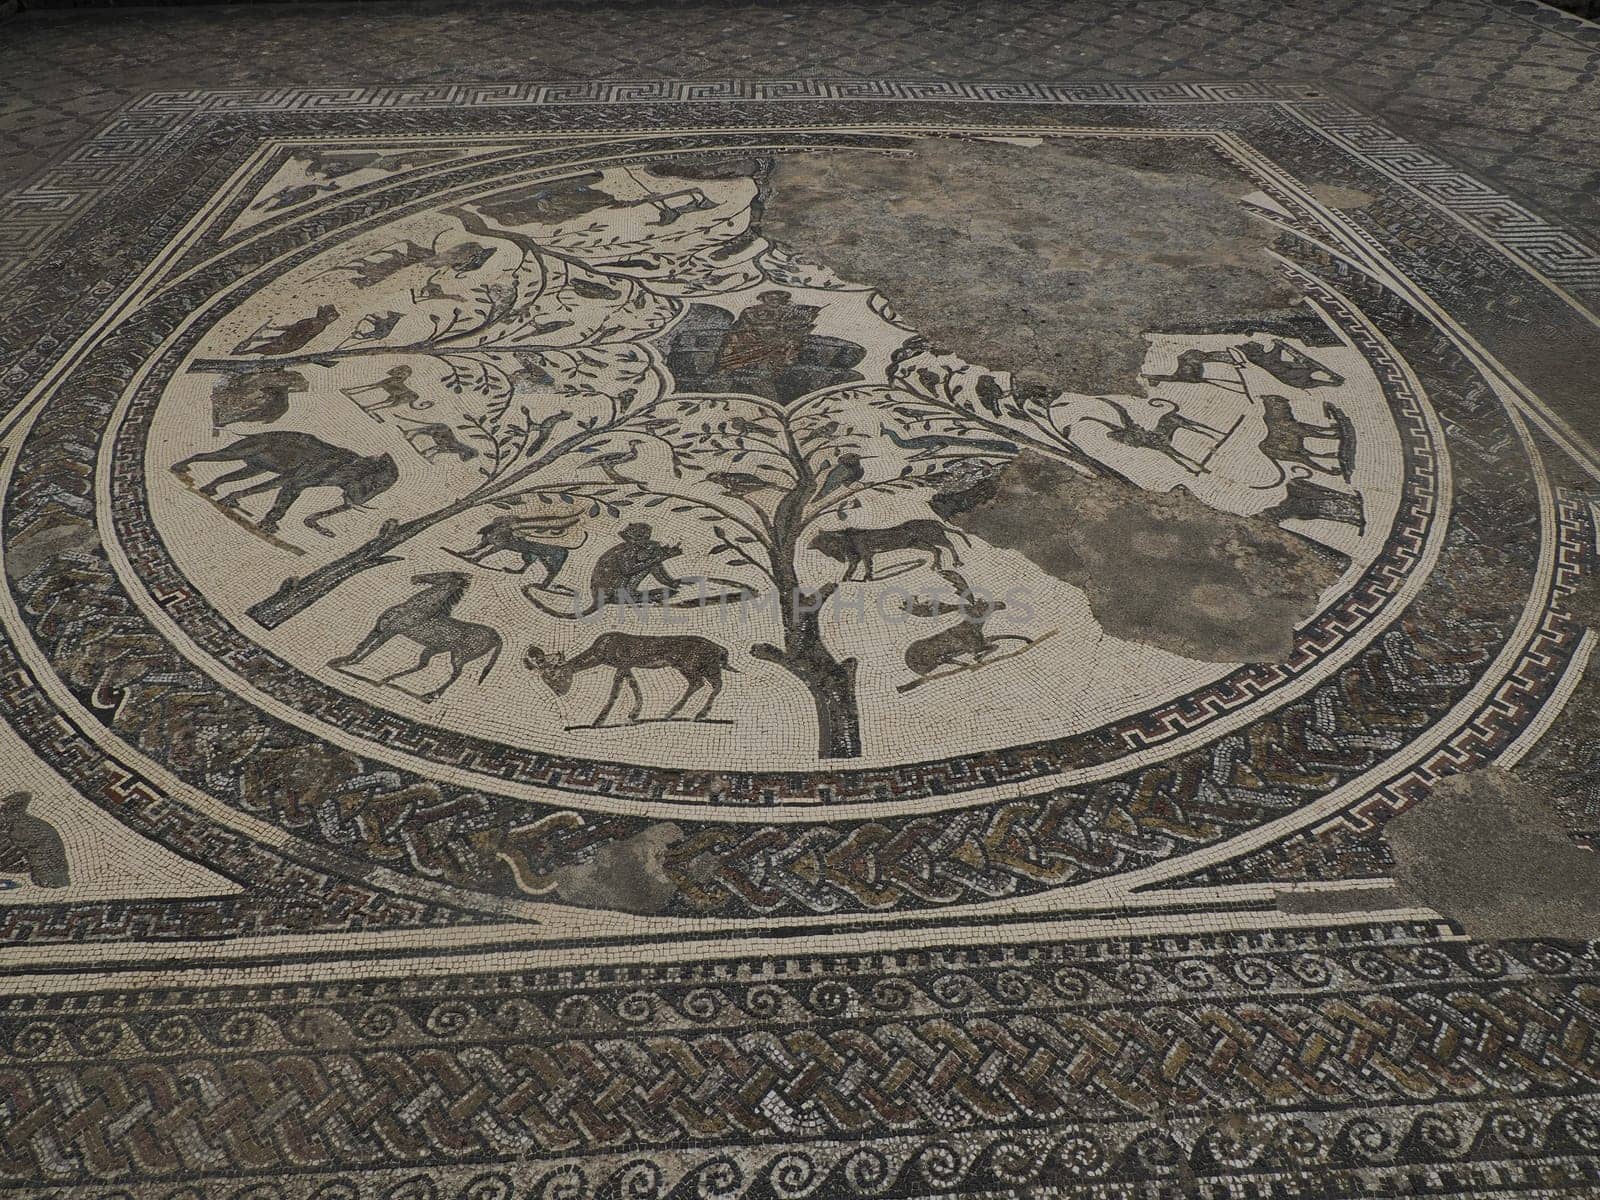 Mosaic of Volubilis Roman ruins in Morocco- Best-preserved Roman ruins located between the Imperial Cities of Fez and Meknes on a fertile plain surrounded by wheat fields.